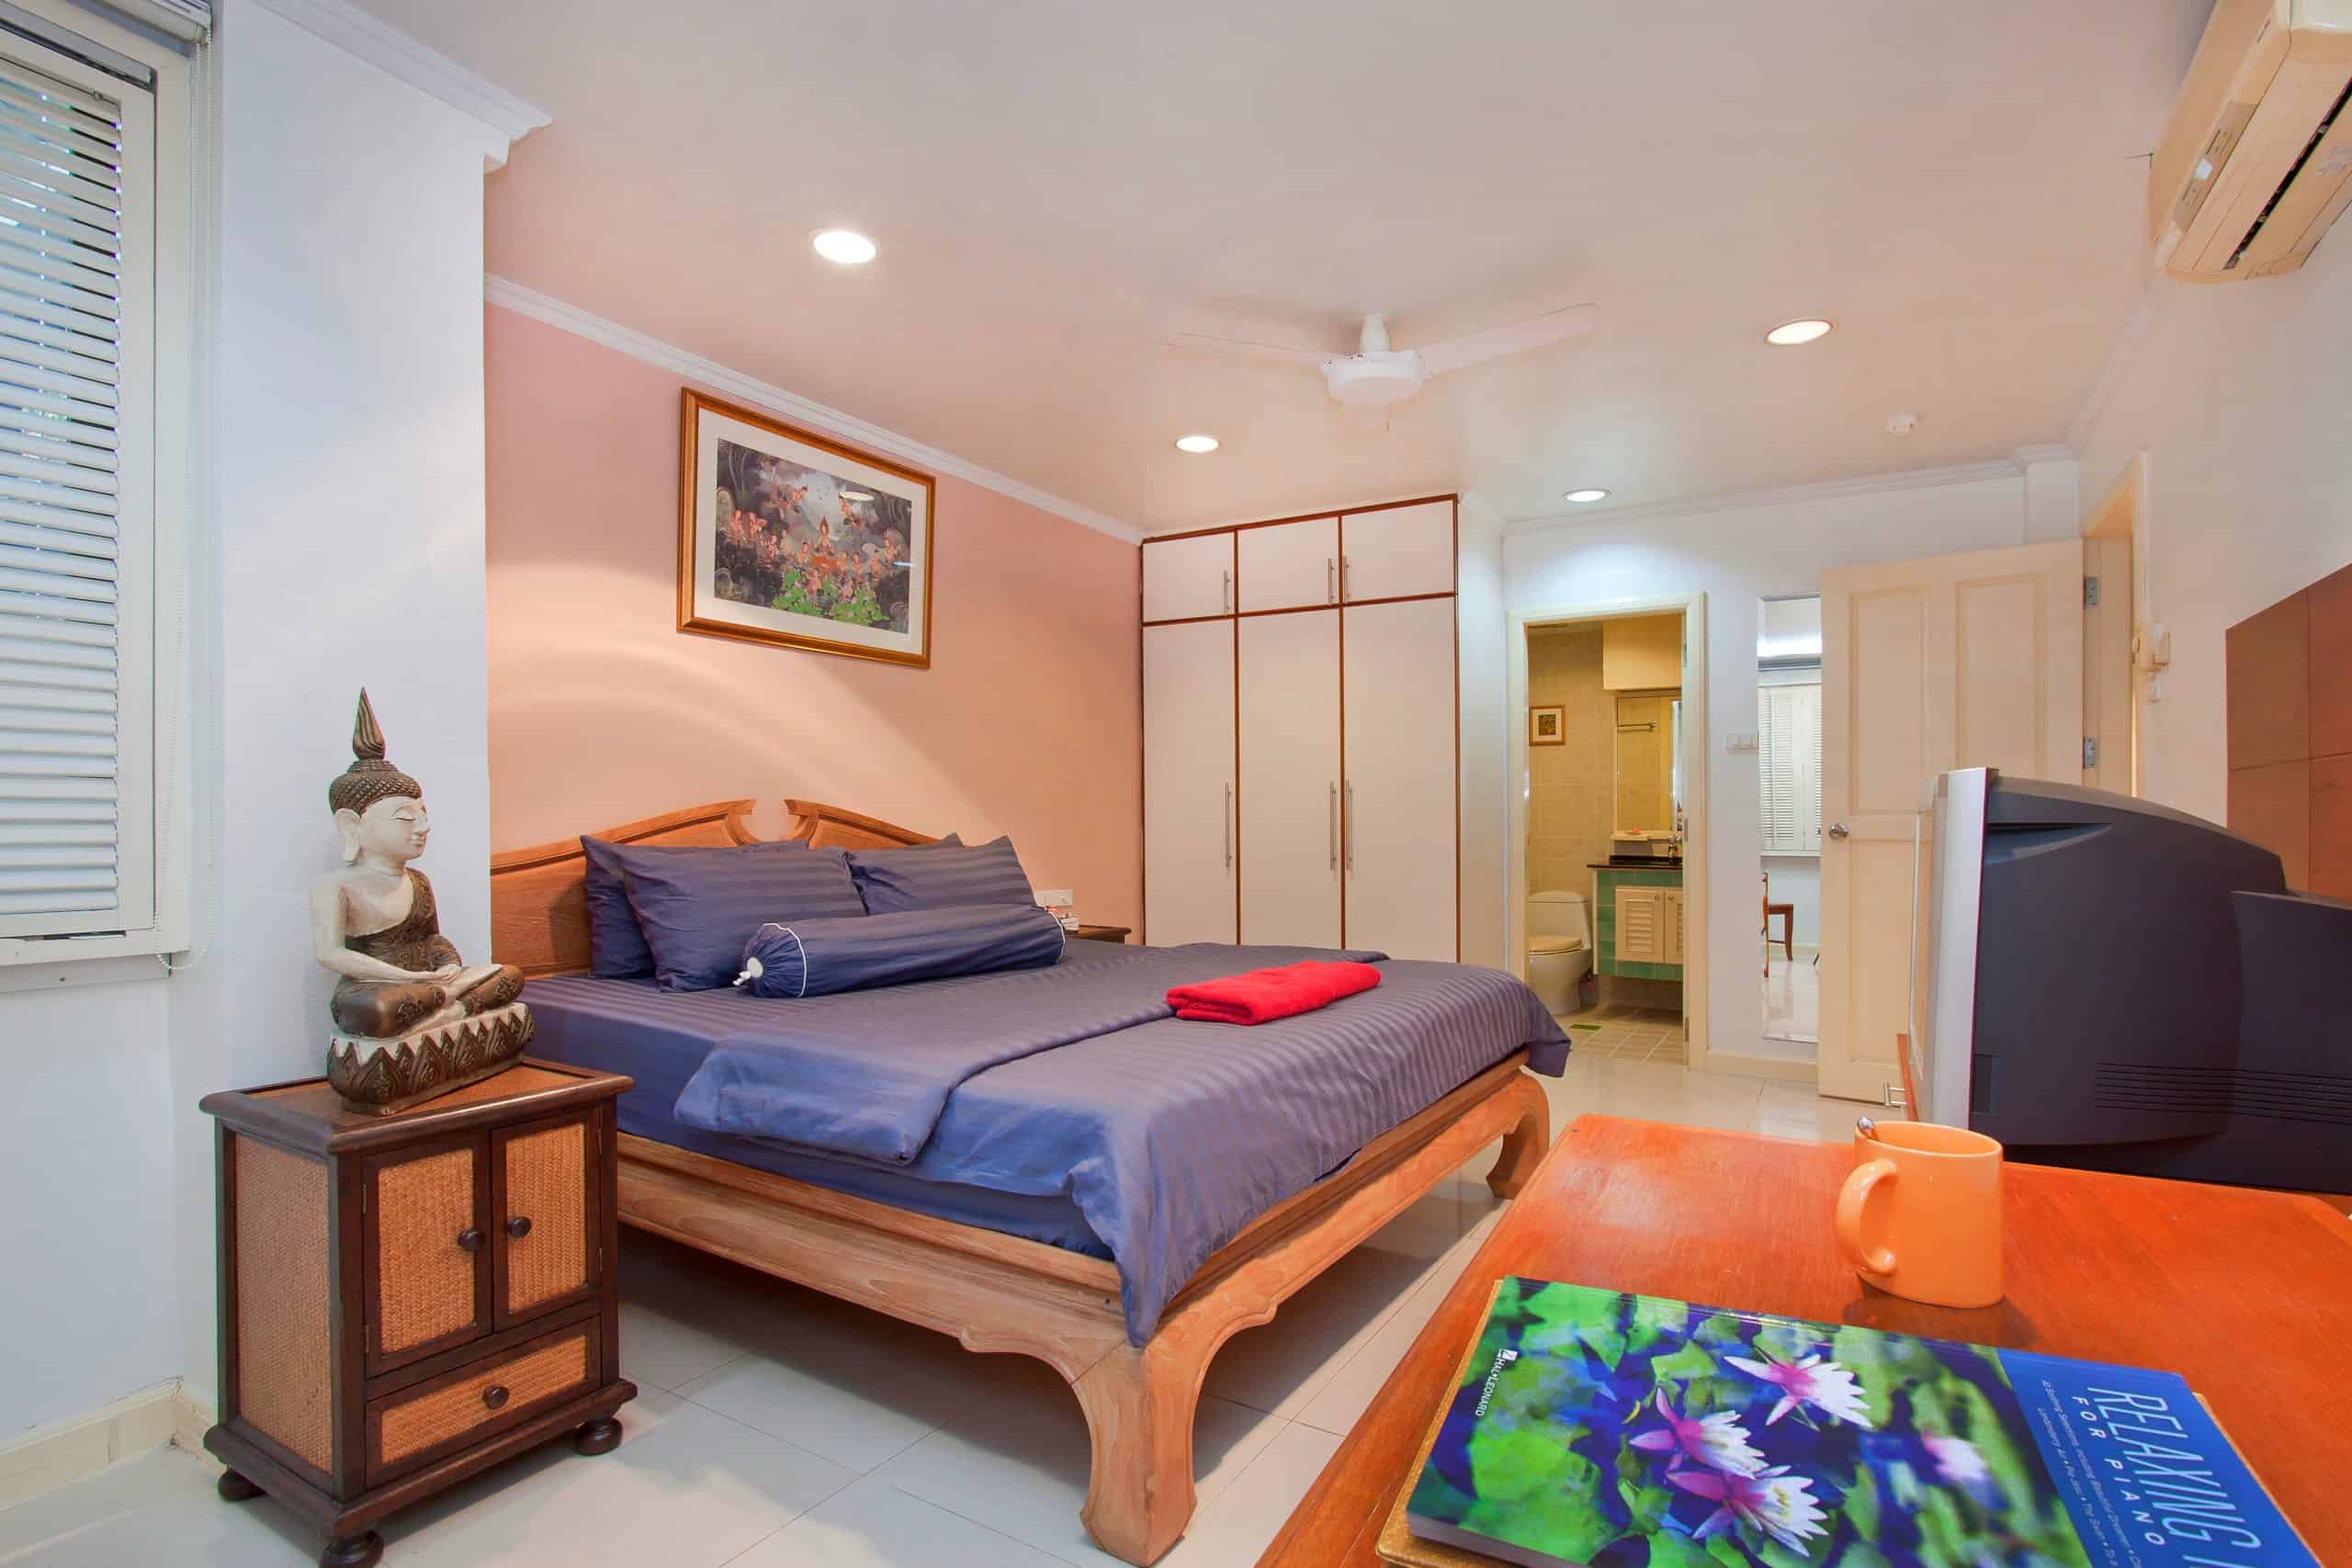 Enjoy your holiday to the fullest in this stylish and compact small studio apartment in Pattaya, complete with a cozy bed, functional kitchenette, private shower, air conditioning, and Wi-Fi.